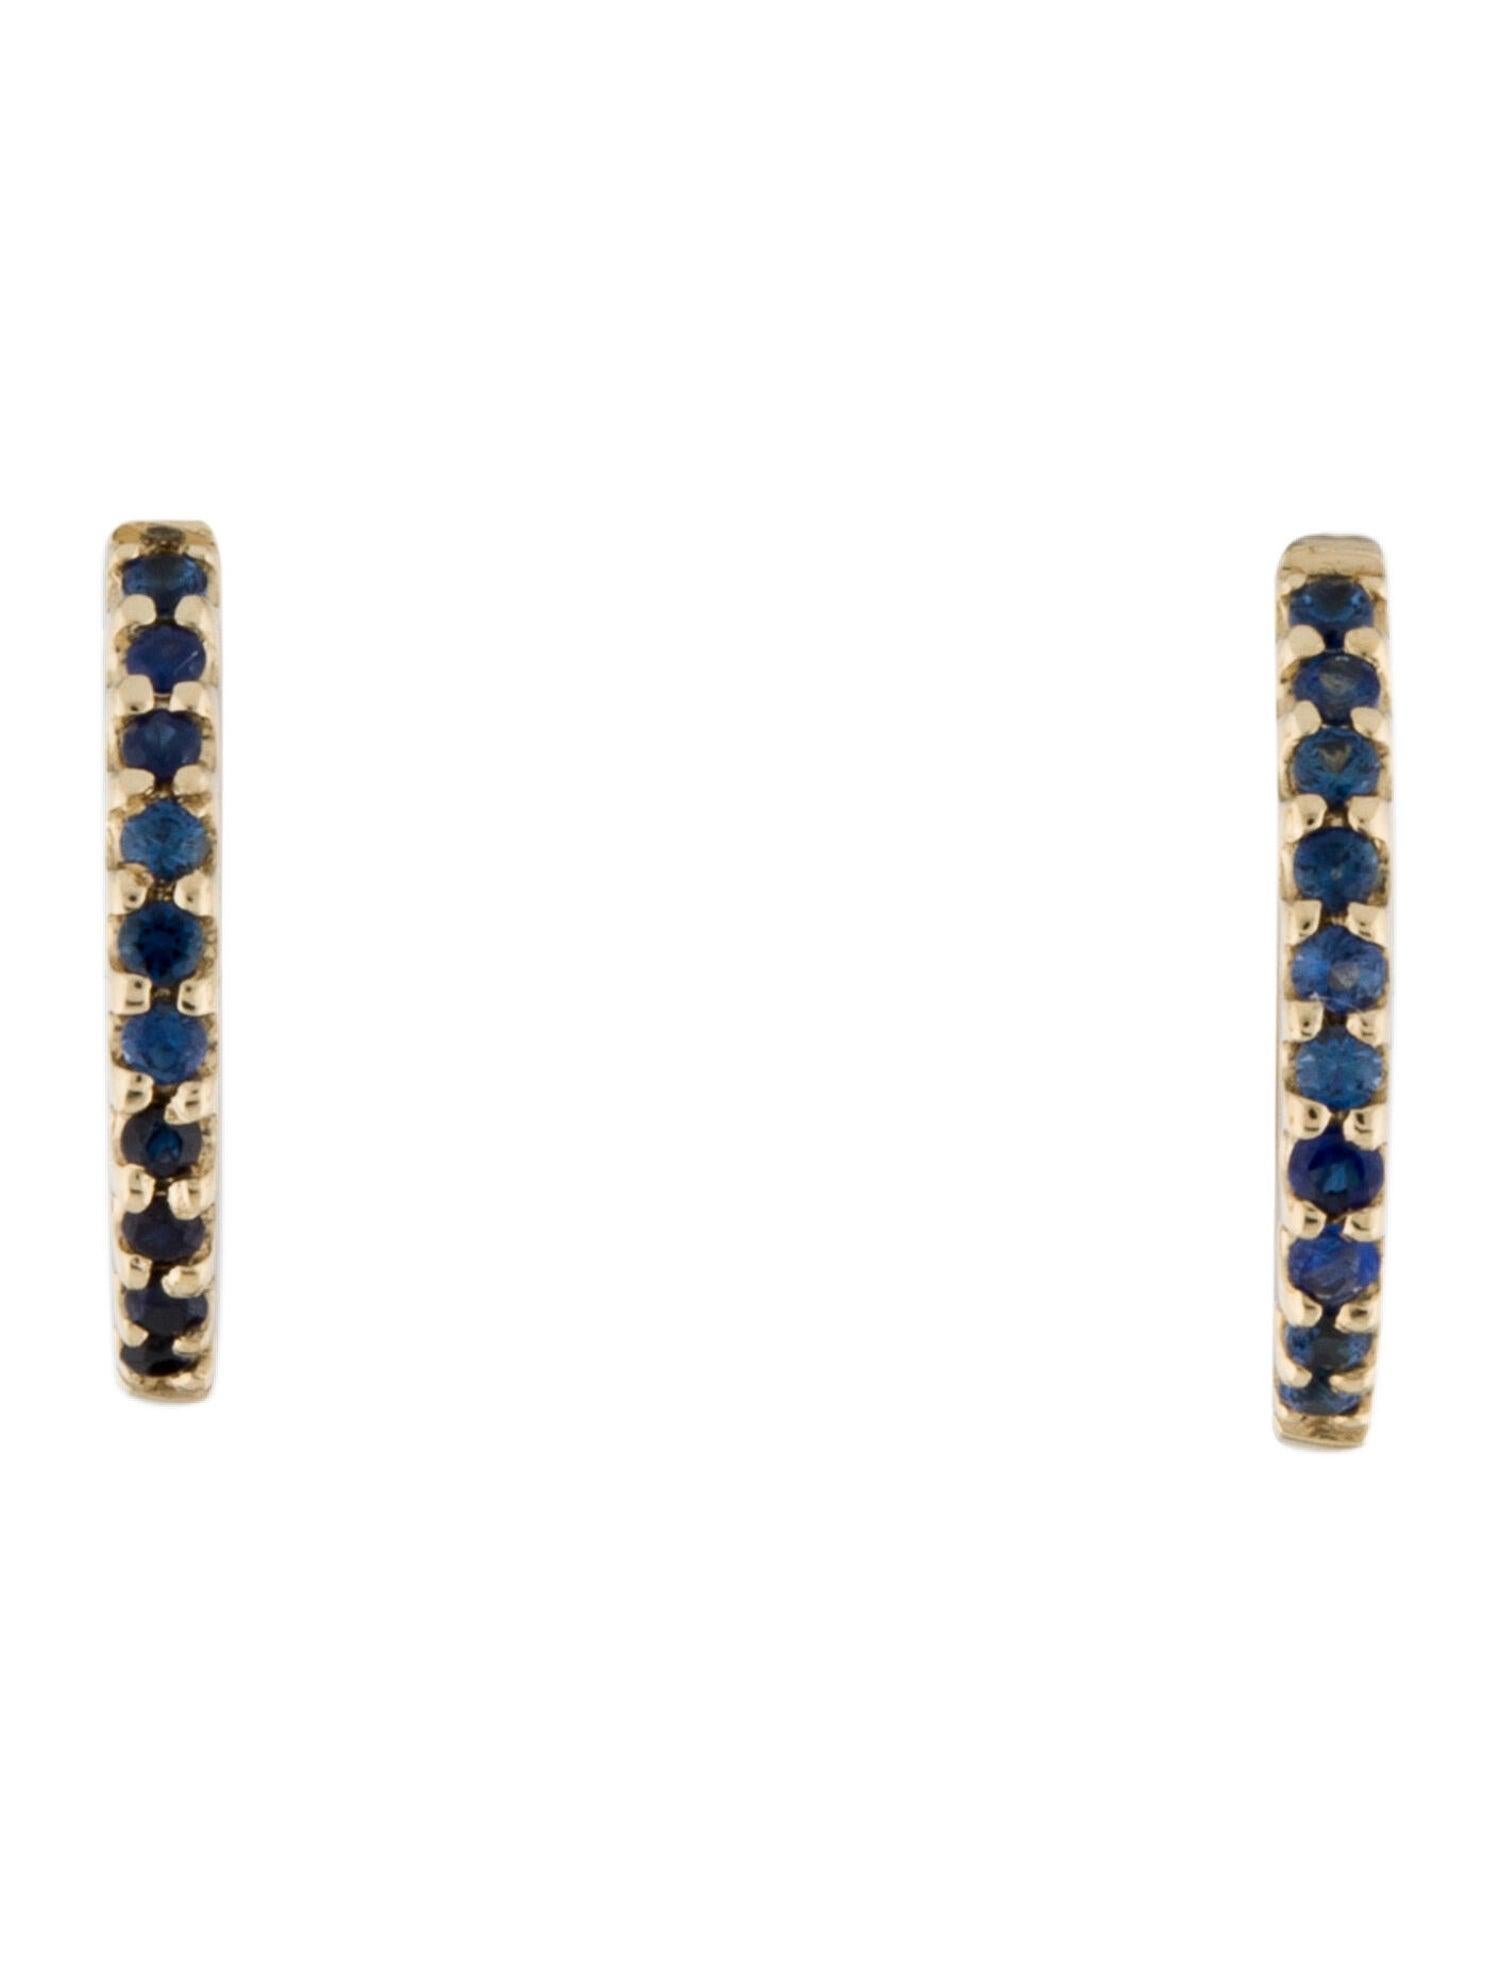 Contemporary 14K Yellow Gold 0.18 Carat Blue Sapphire Huggie Hoop Earrings For Sale